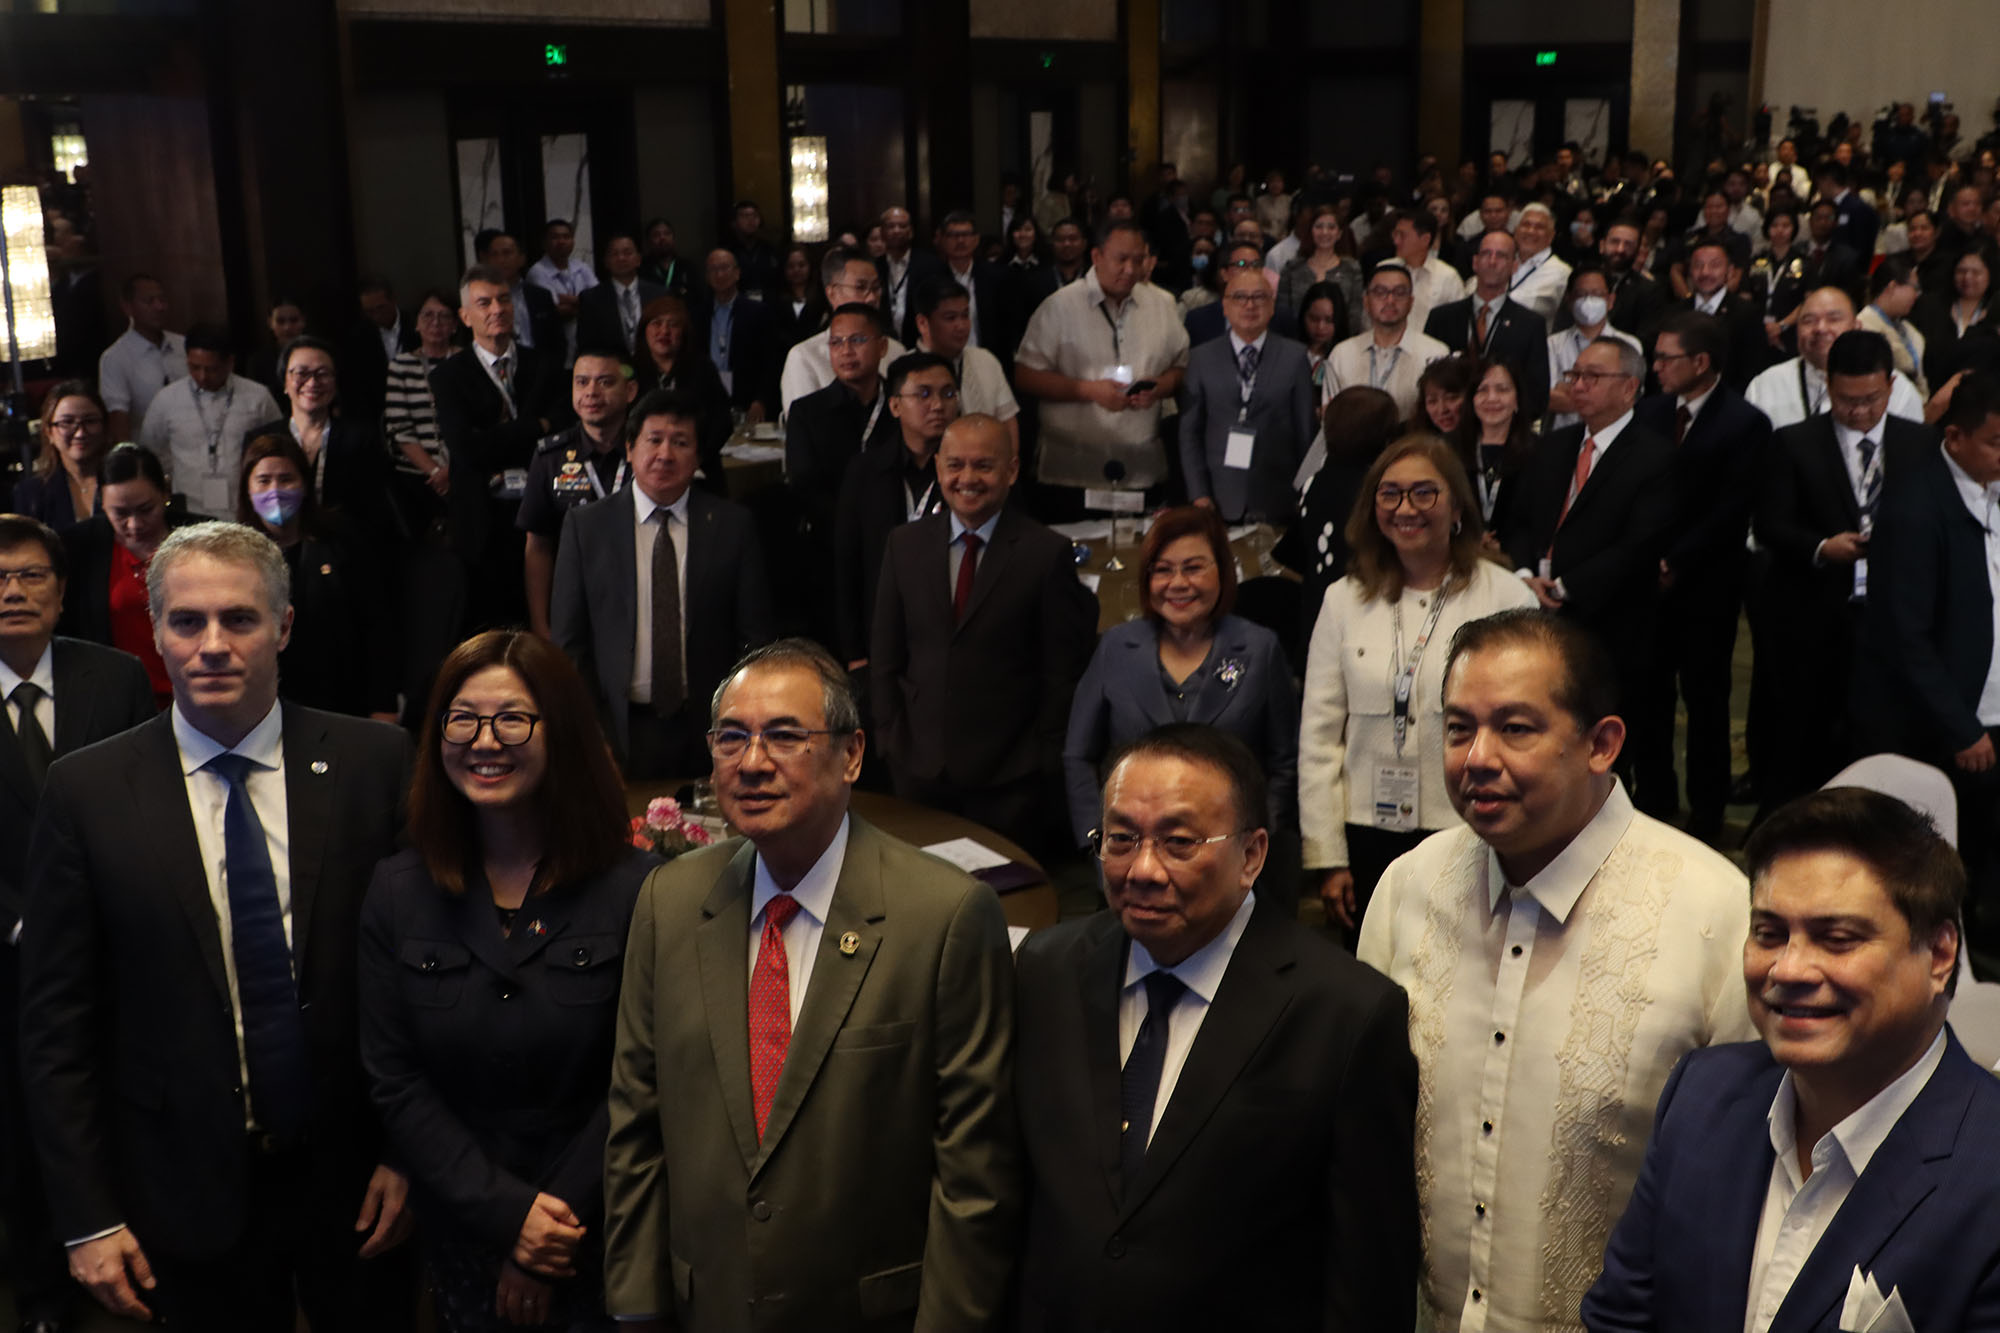 From left to right: UNODC Country Manager for the Philippines Daniele Marchesi, Australian Ambassador HK Yu PSM, Supreme Court Chief Justice Alexander Gesmundo, Executive Secretary Lucas Bersamin (representing President Ferdinand R. Marcos Jr.), Speaker of the House of Representatives Ferdinand Martin G. Romualdez, and Senate President Juan Miguel "Migz" Zubiri at the summit in Manila.